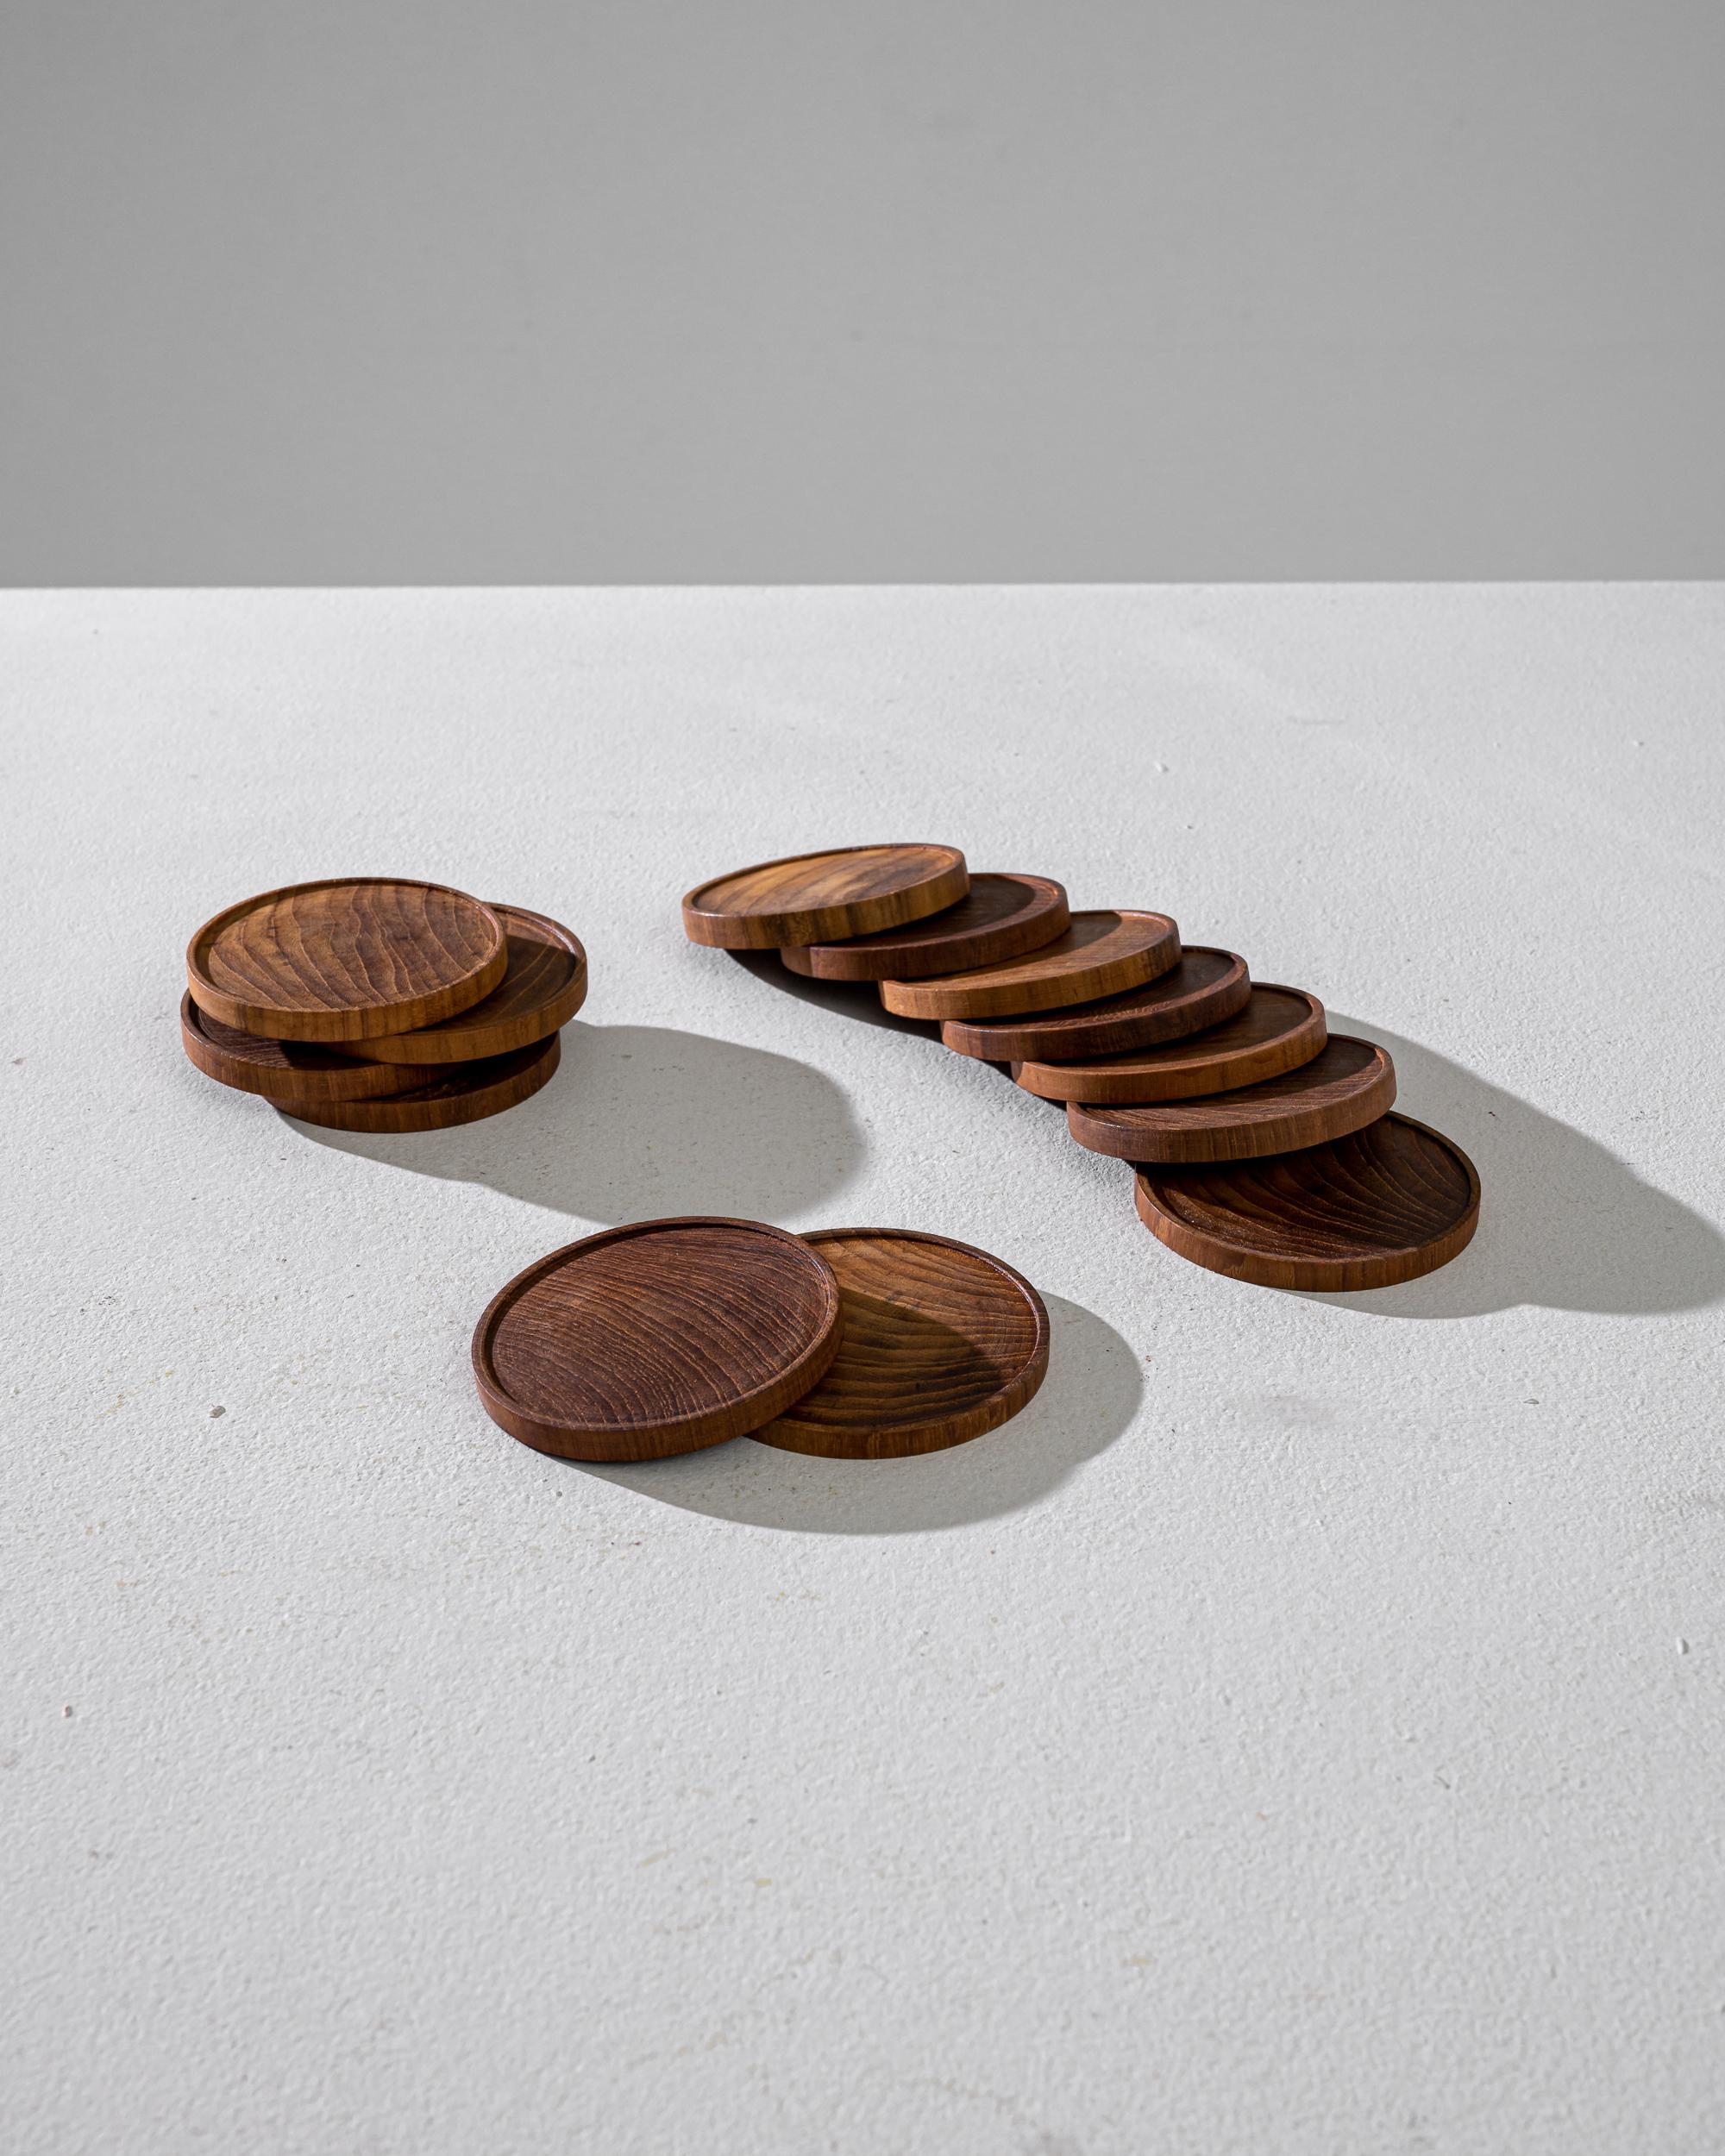 This elegant vintage set features 13 round teak coasters made in Denmark in the twentieth century. Resembling ancient wooden coins, the coasters have carved edges that prevent the drink from sliding around. The rich teak wood reveals the unique